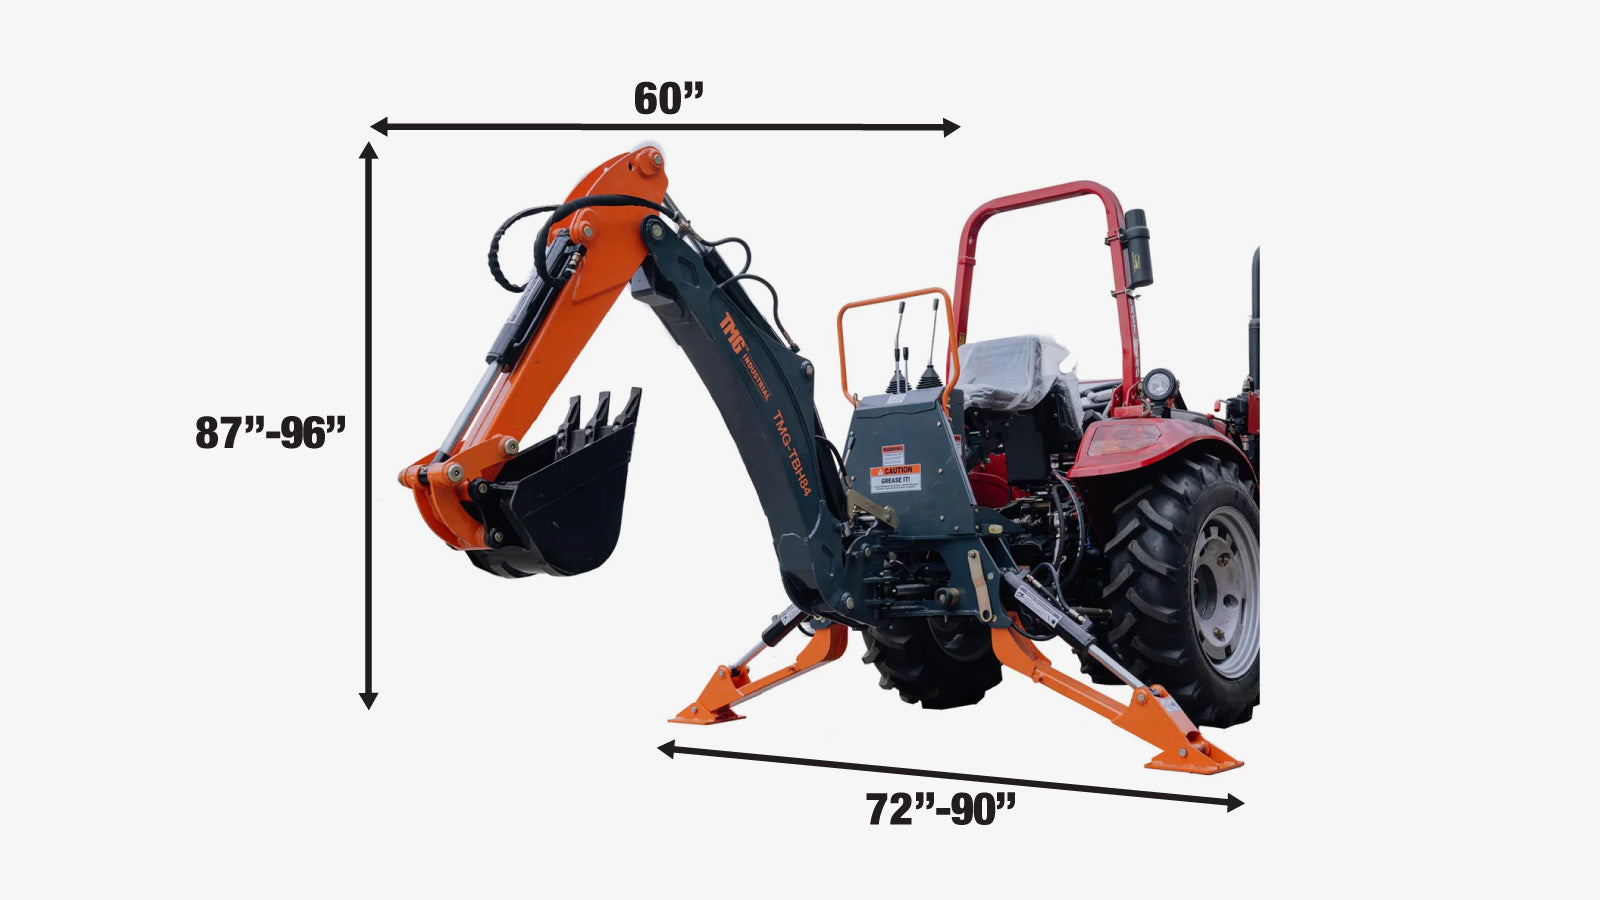 TMG Industrial 7-FT 3-Point Hitch Swing Backhoe Attachment, 12” Bucket Included, 40-100 HP Tractor, 126” High Reach, Category 1 & 2 Hookups, TMG-TBH84-specifications-image